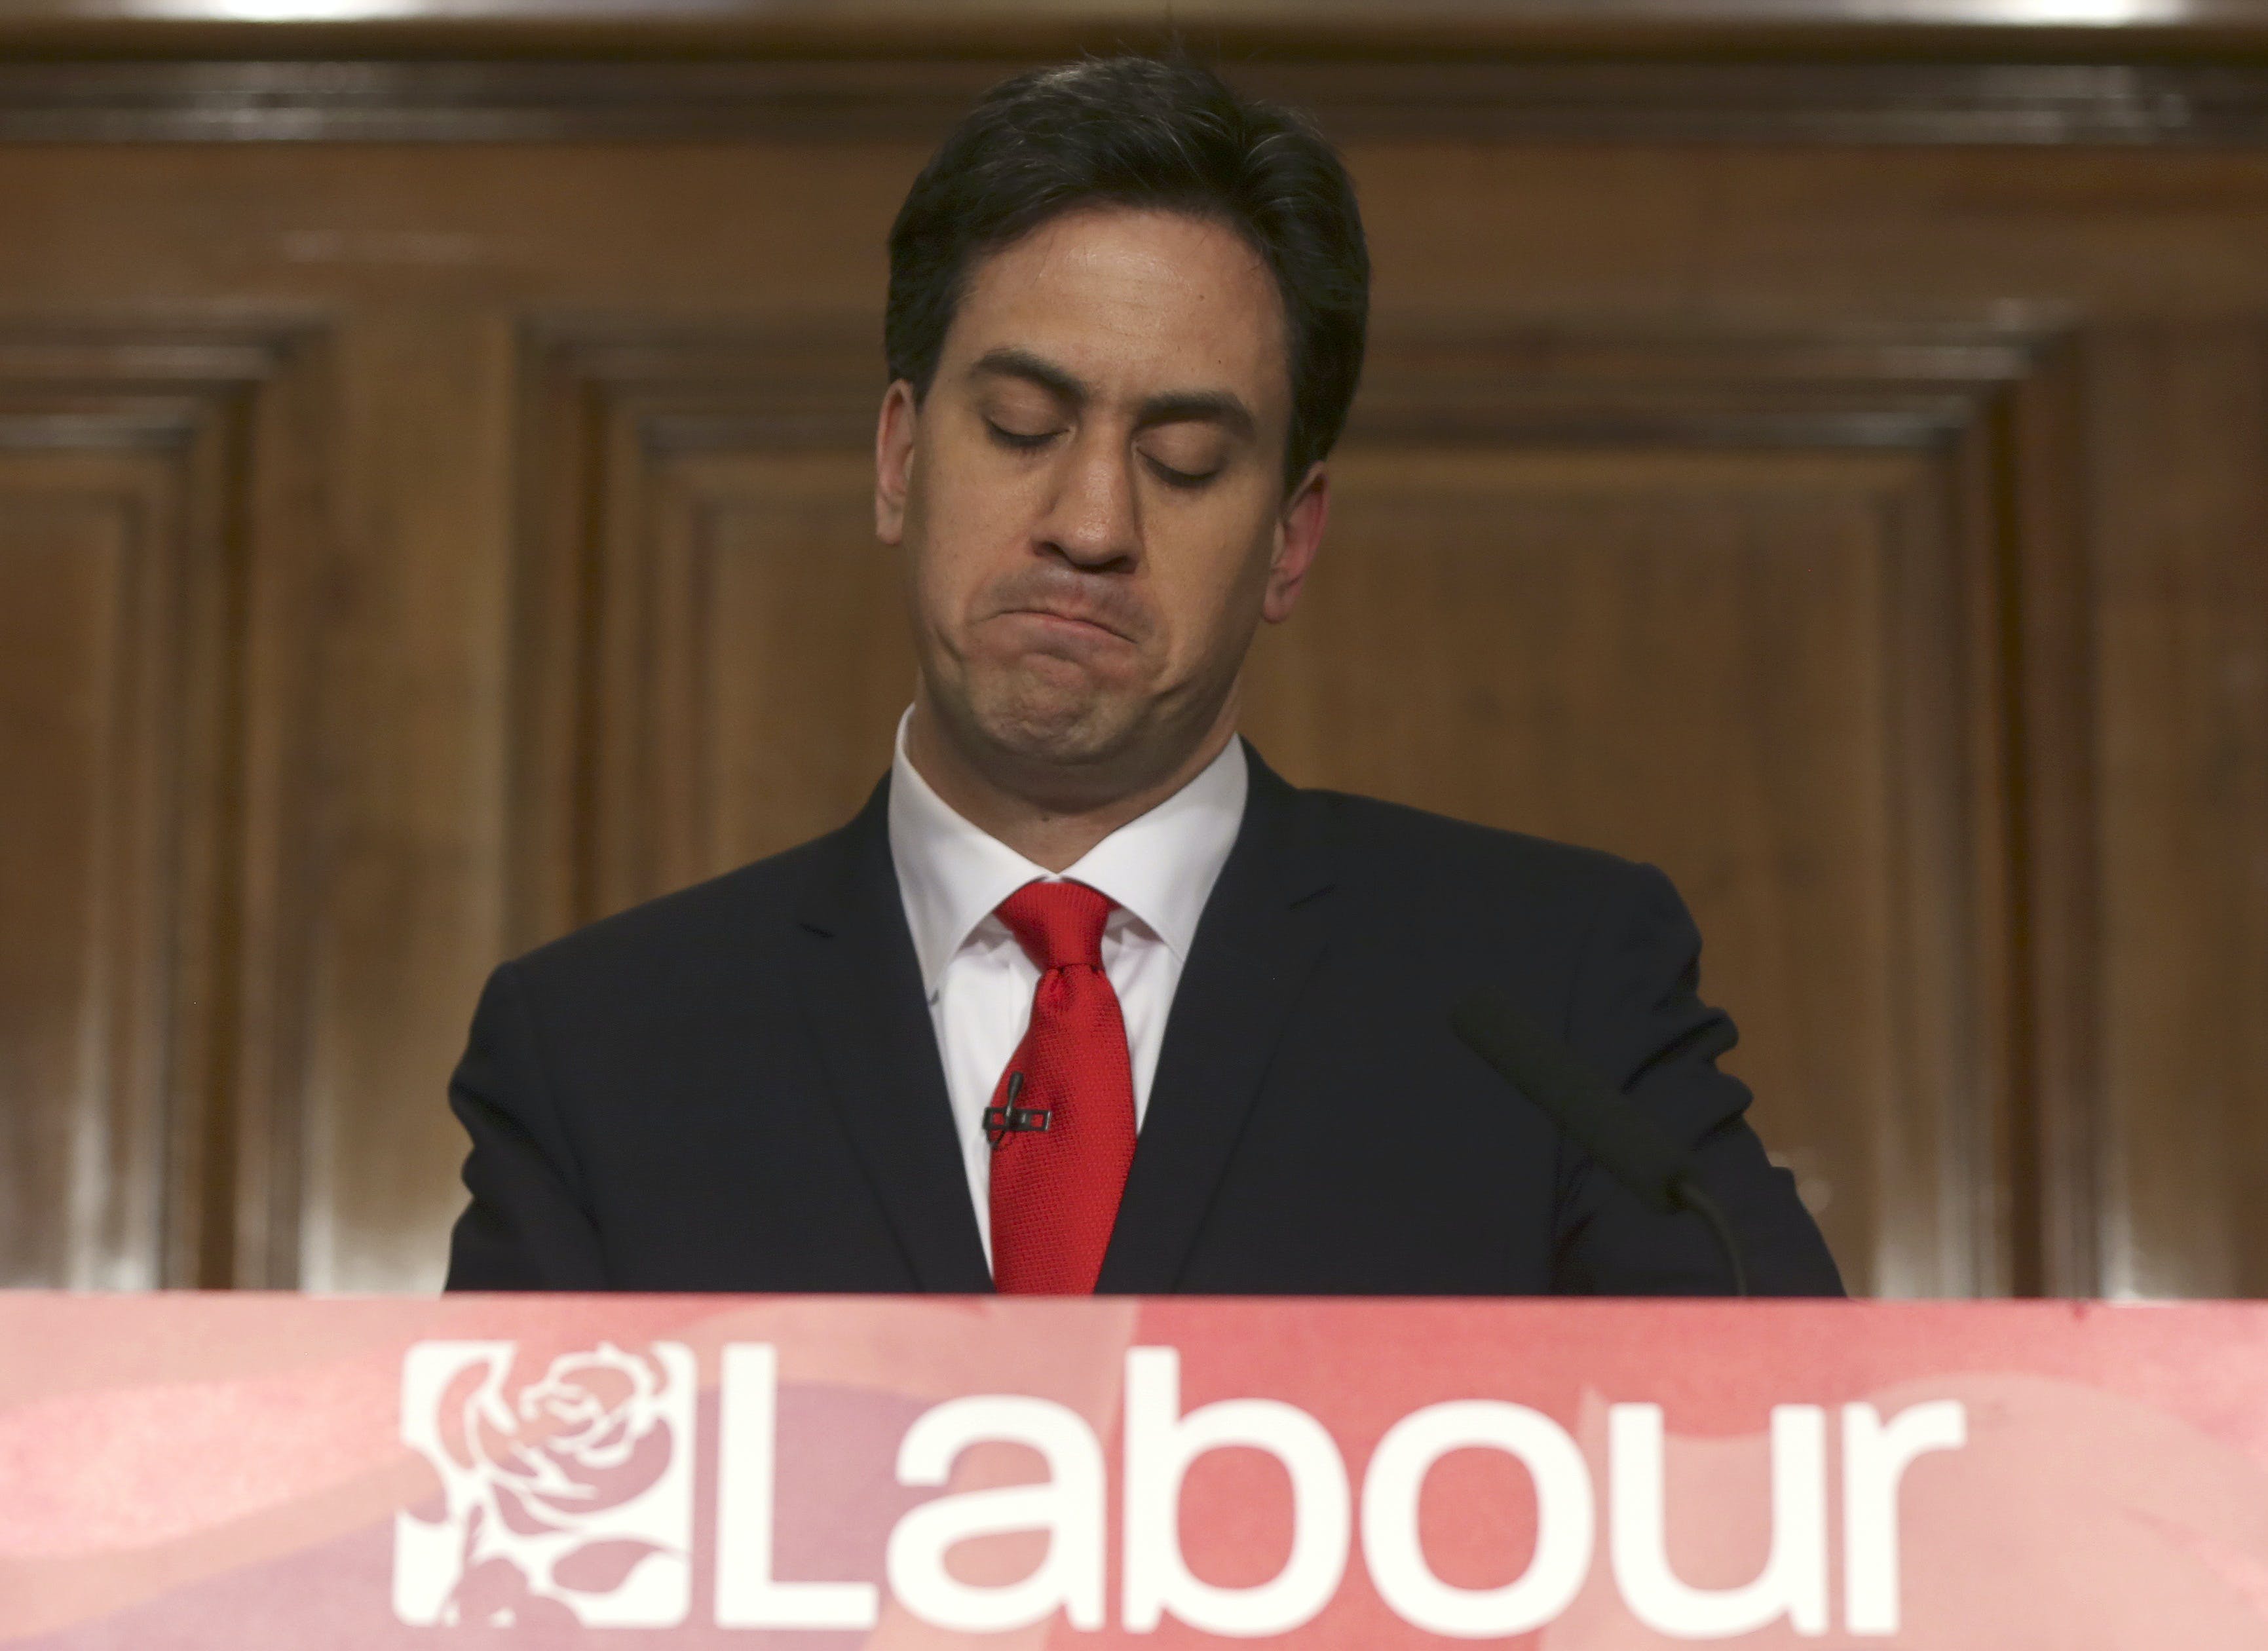 Britain's opposition Labour Party leader Miliband announces his resignation as leader at news conference in London